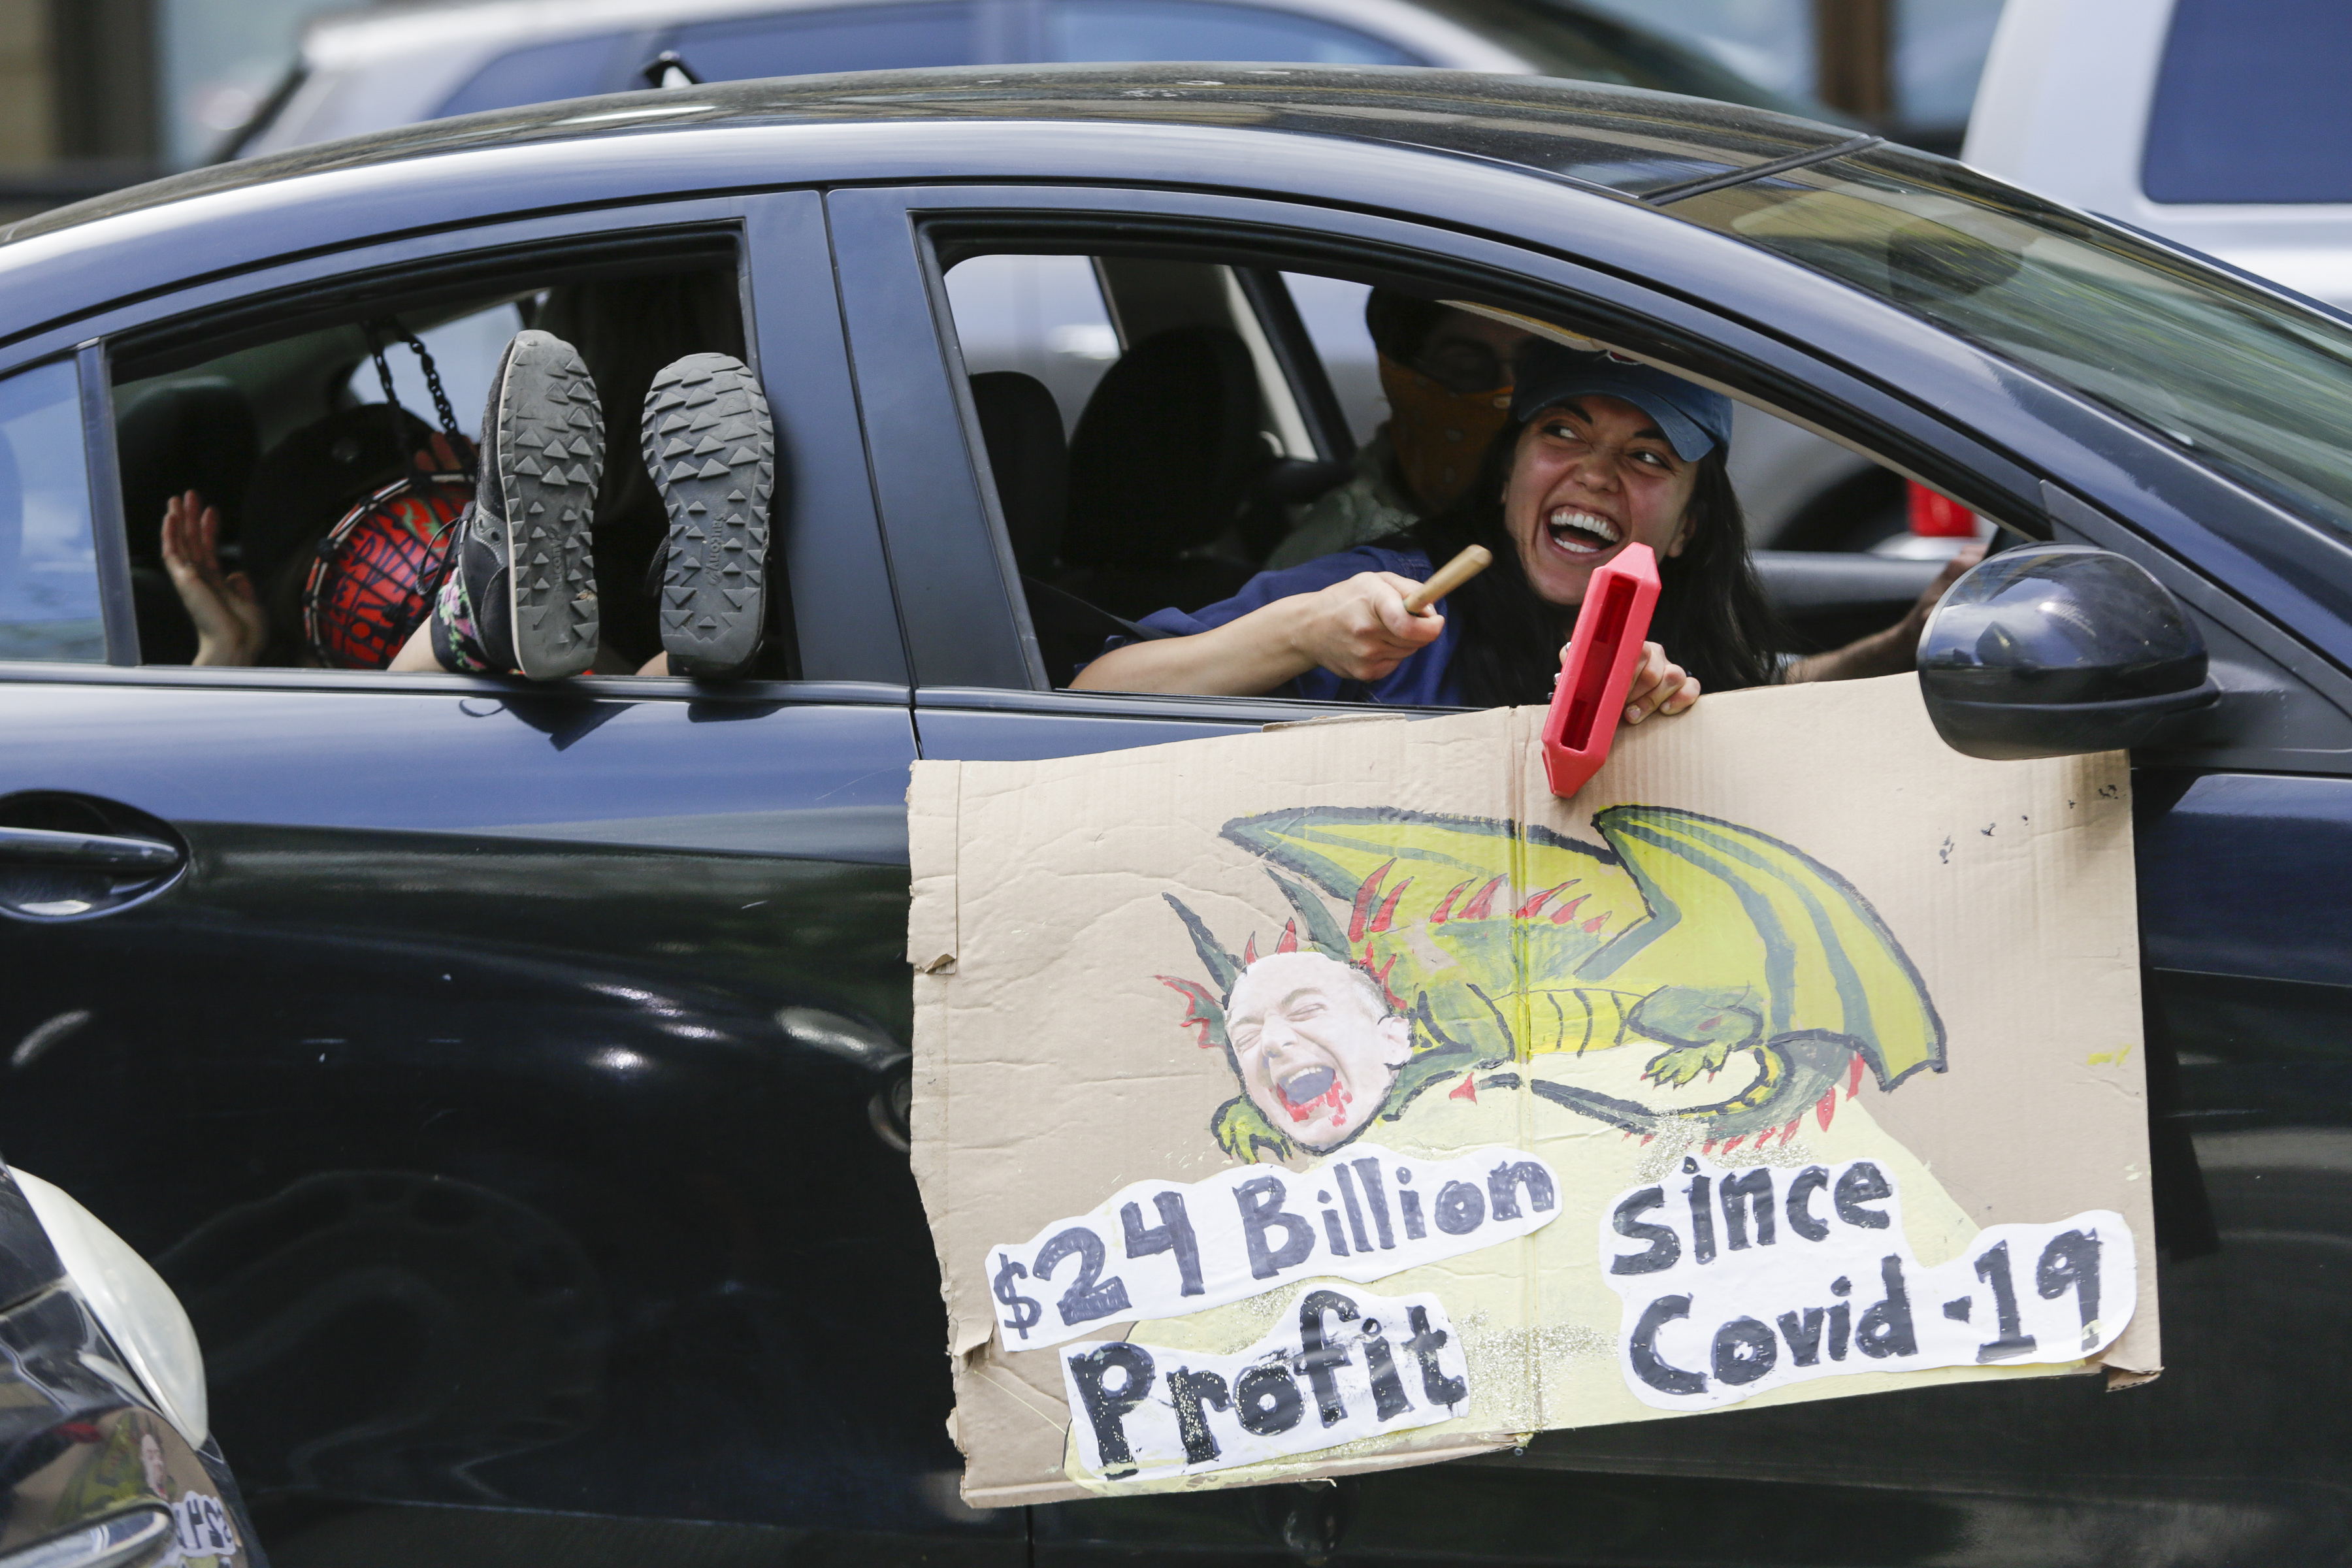 Protesters wave signs critical of Amazon founder Jeff Bezos's growing wealth during a car caravan outside Amazon headquarters in Seattle, Wash., on May 1, 2020. (Jason Redmond—AFP/Getty Images)